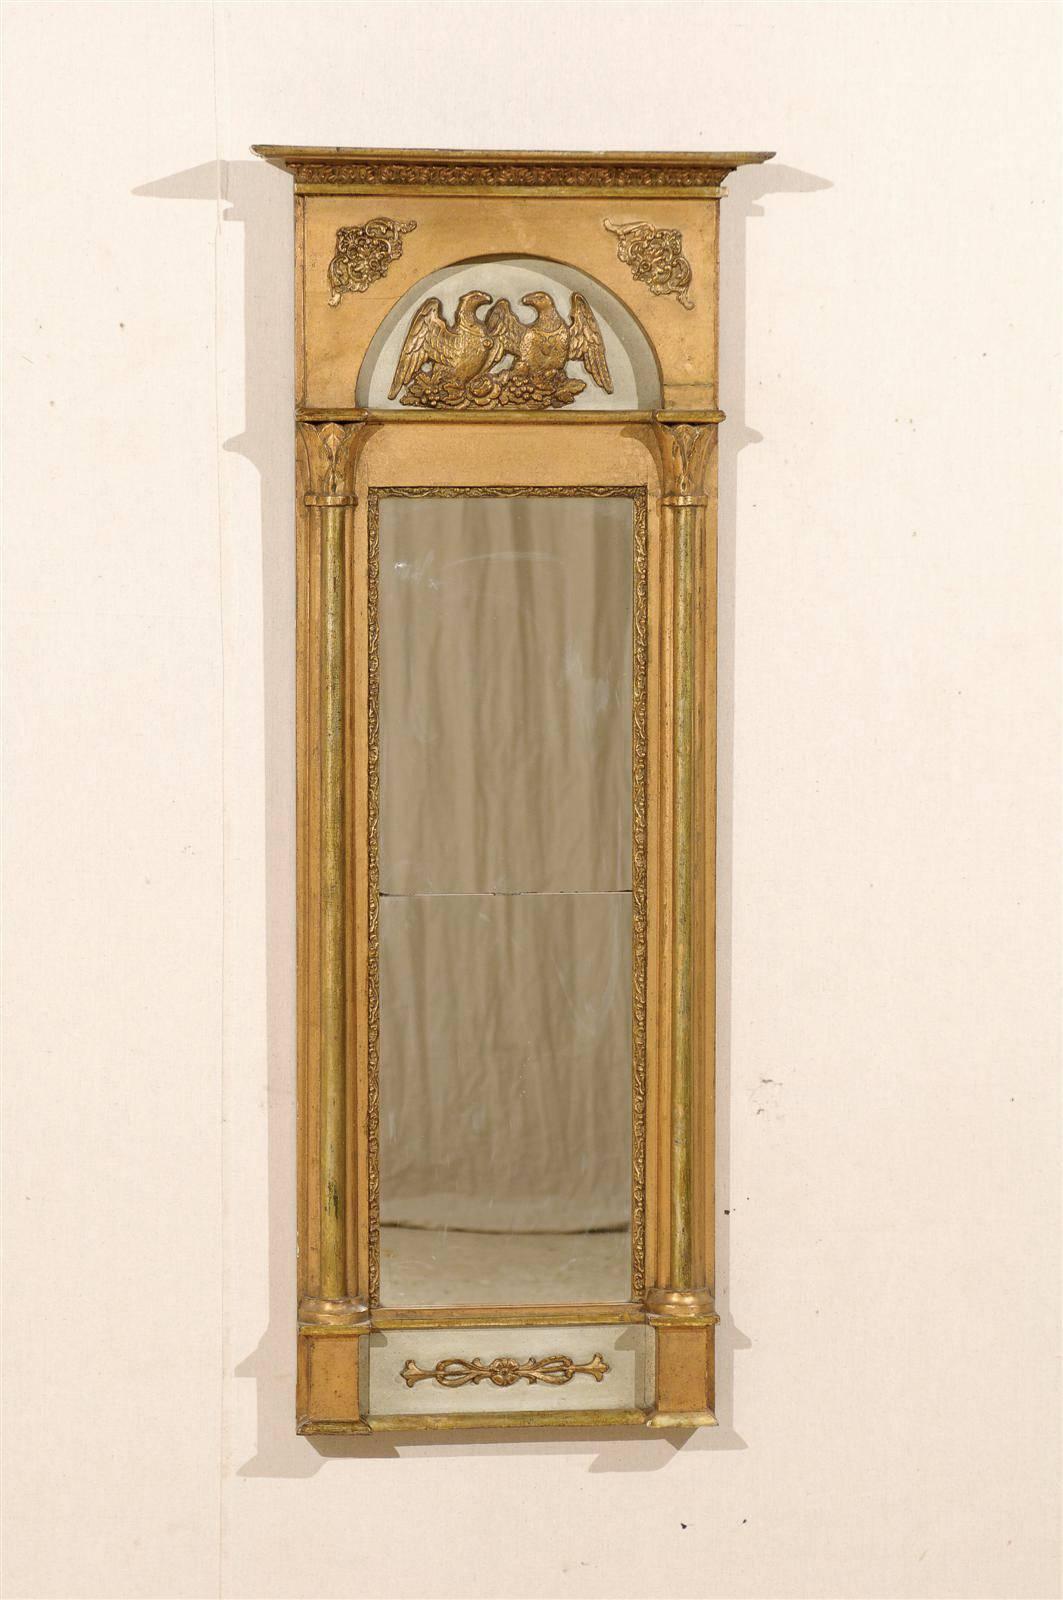 A Swedish 19th century gilded and painted slender wooden mirror with imperial eagles on floral ornaments and Thin Half-Columns with simple capitals on each side.
  